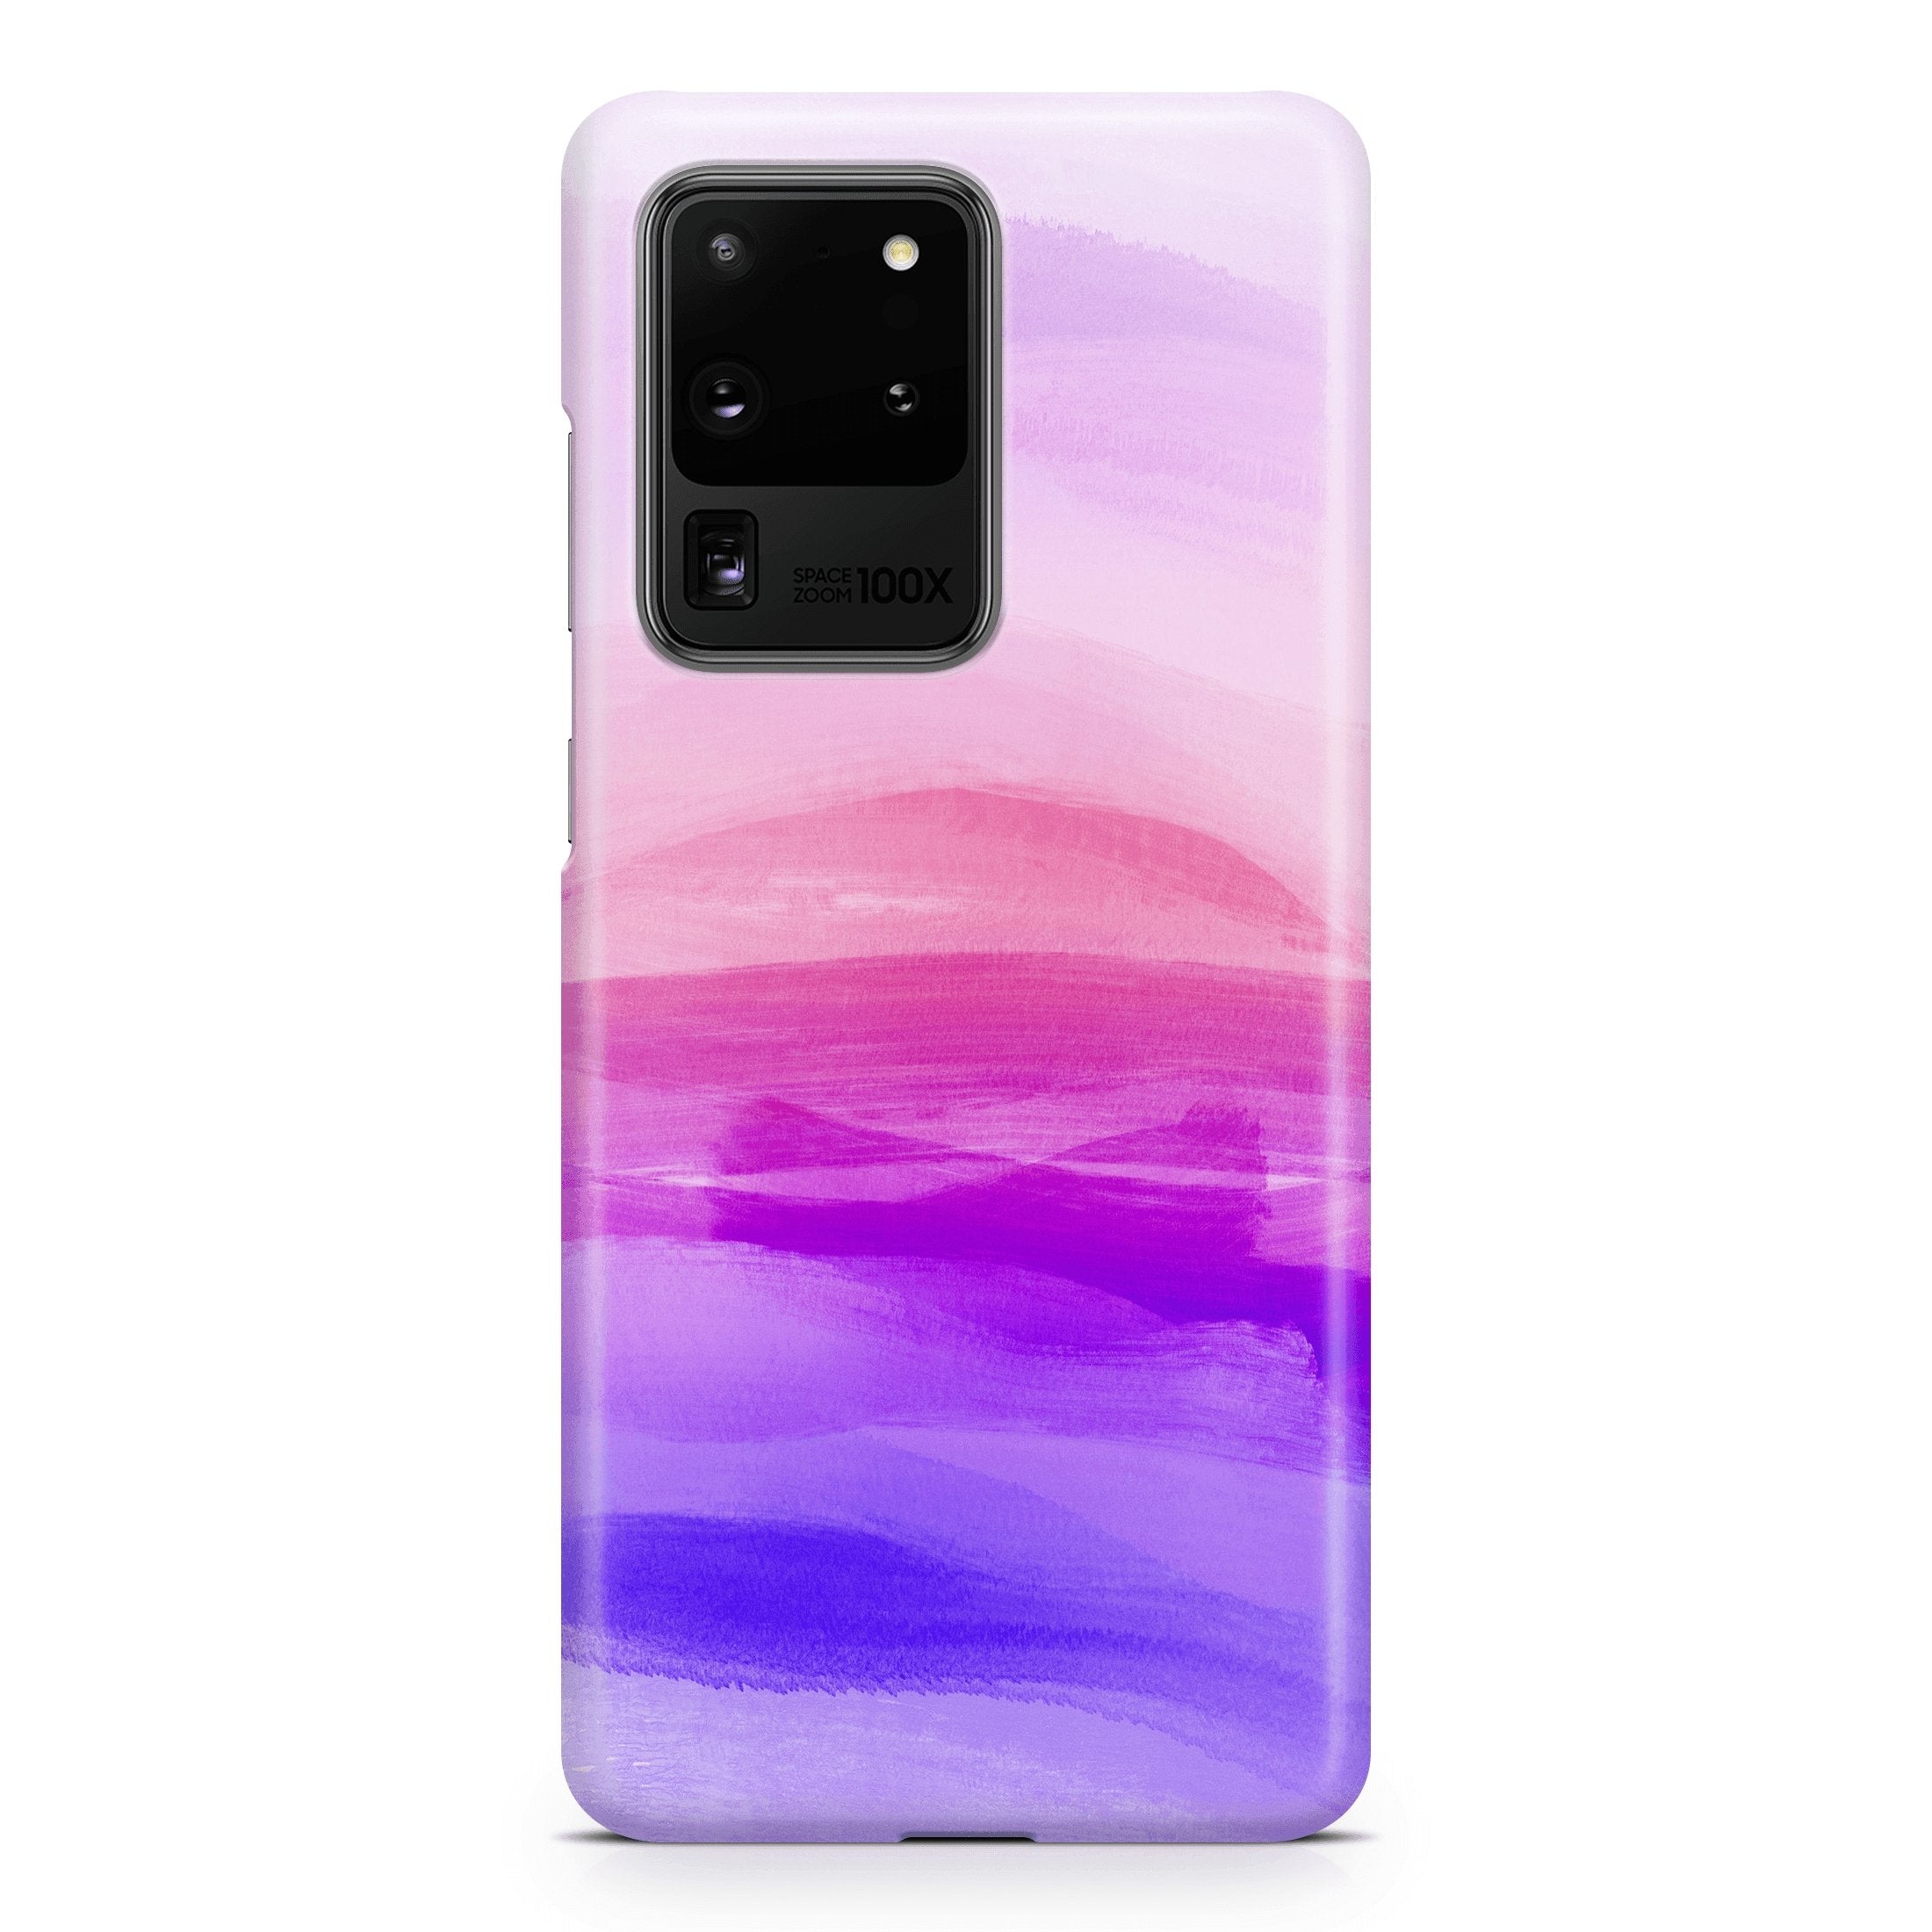 Sunrise Pink Ombre - Samsung phone case designs by CaseSwagger  